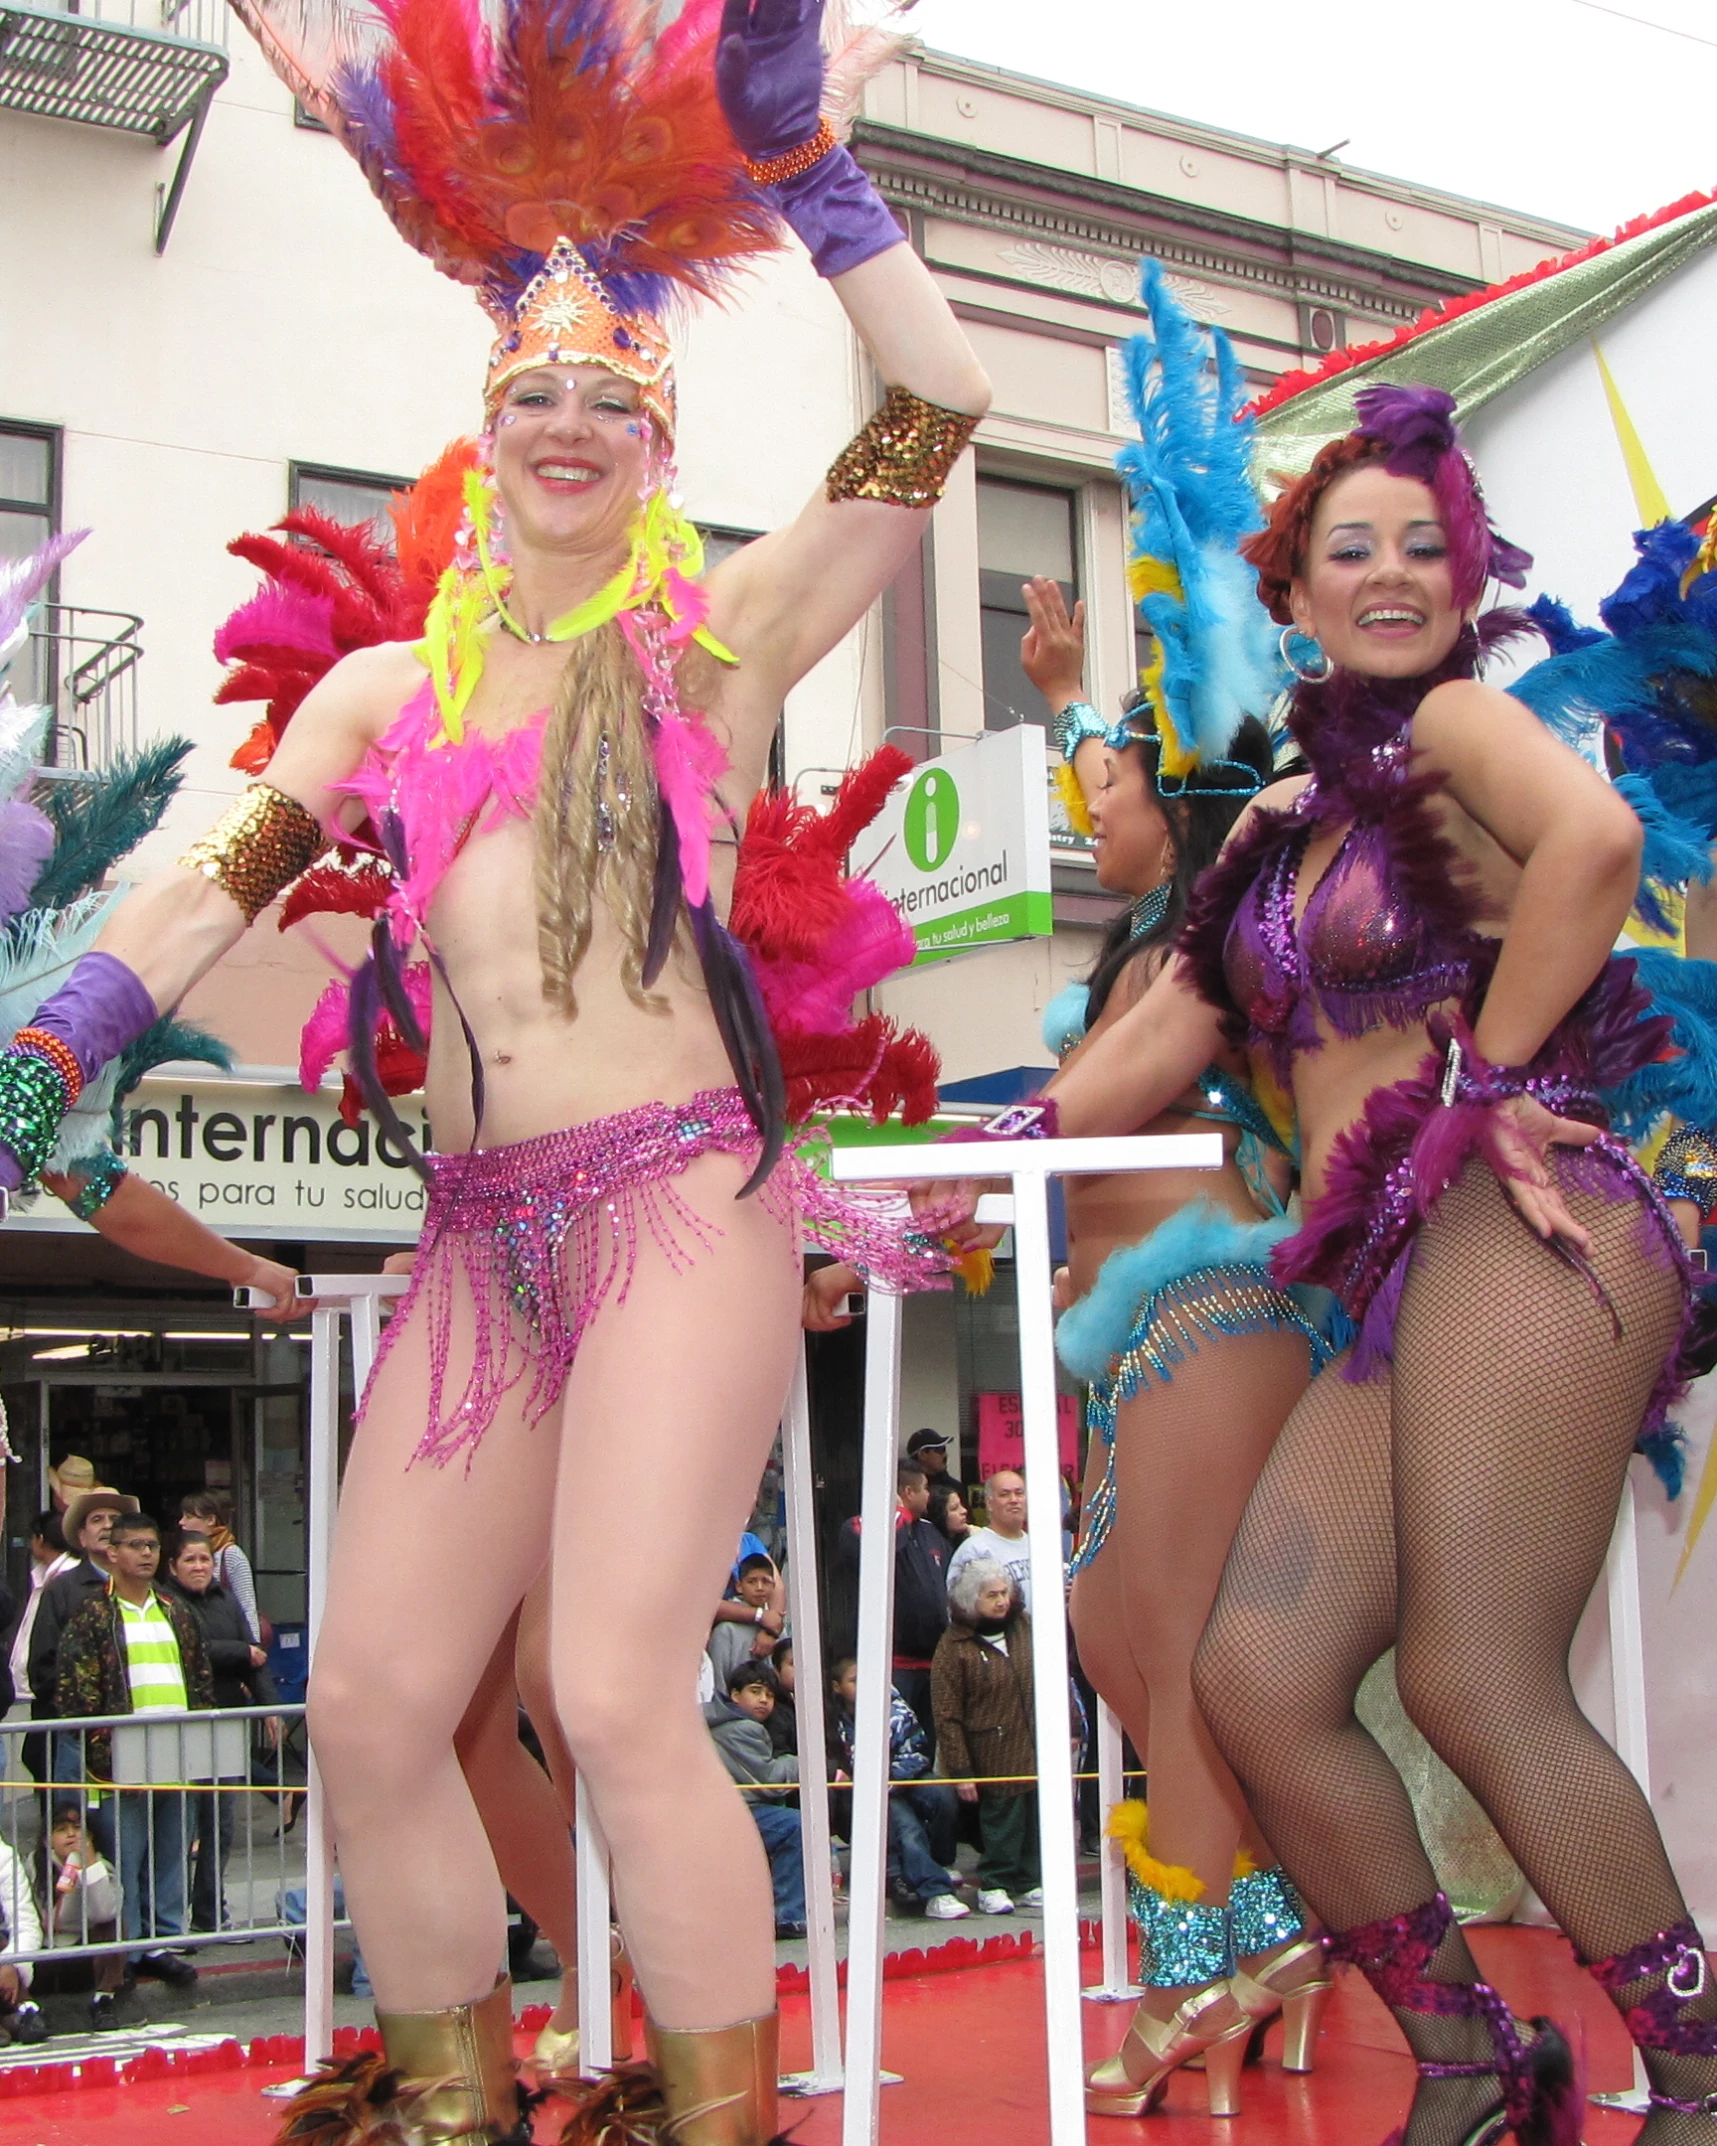 two women in fishnet outfits and one woman with feathers on her head